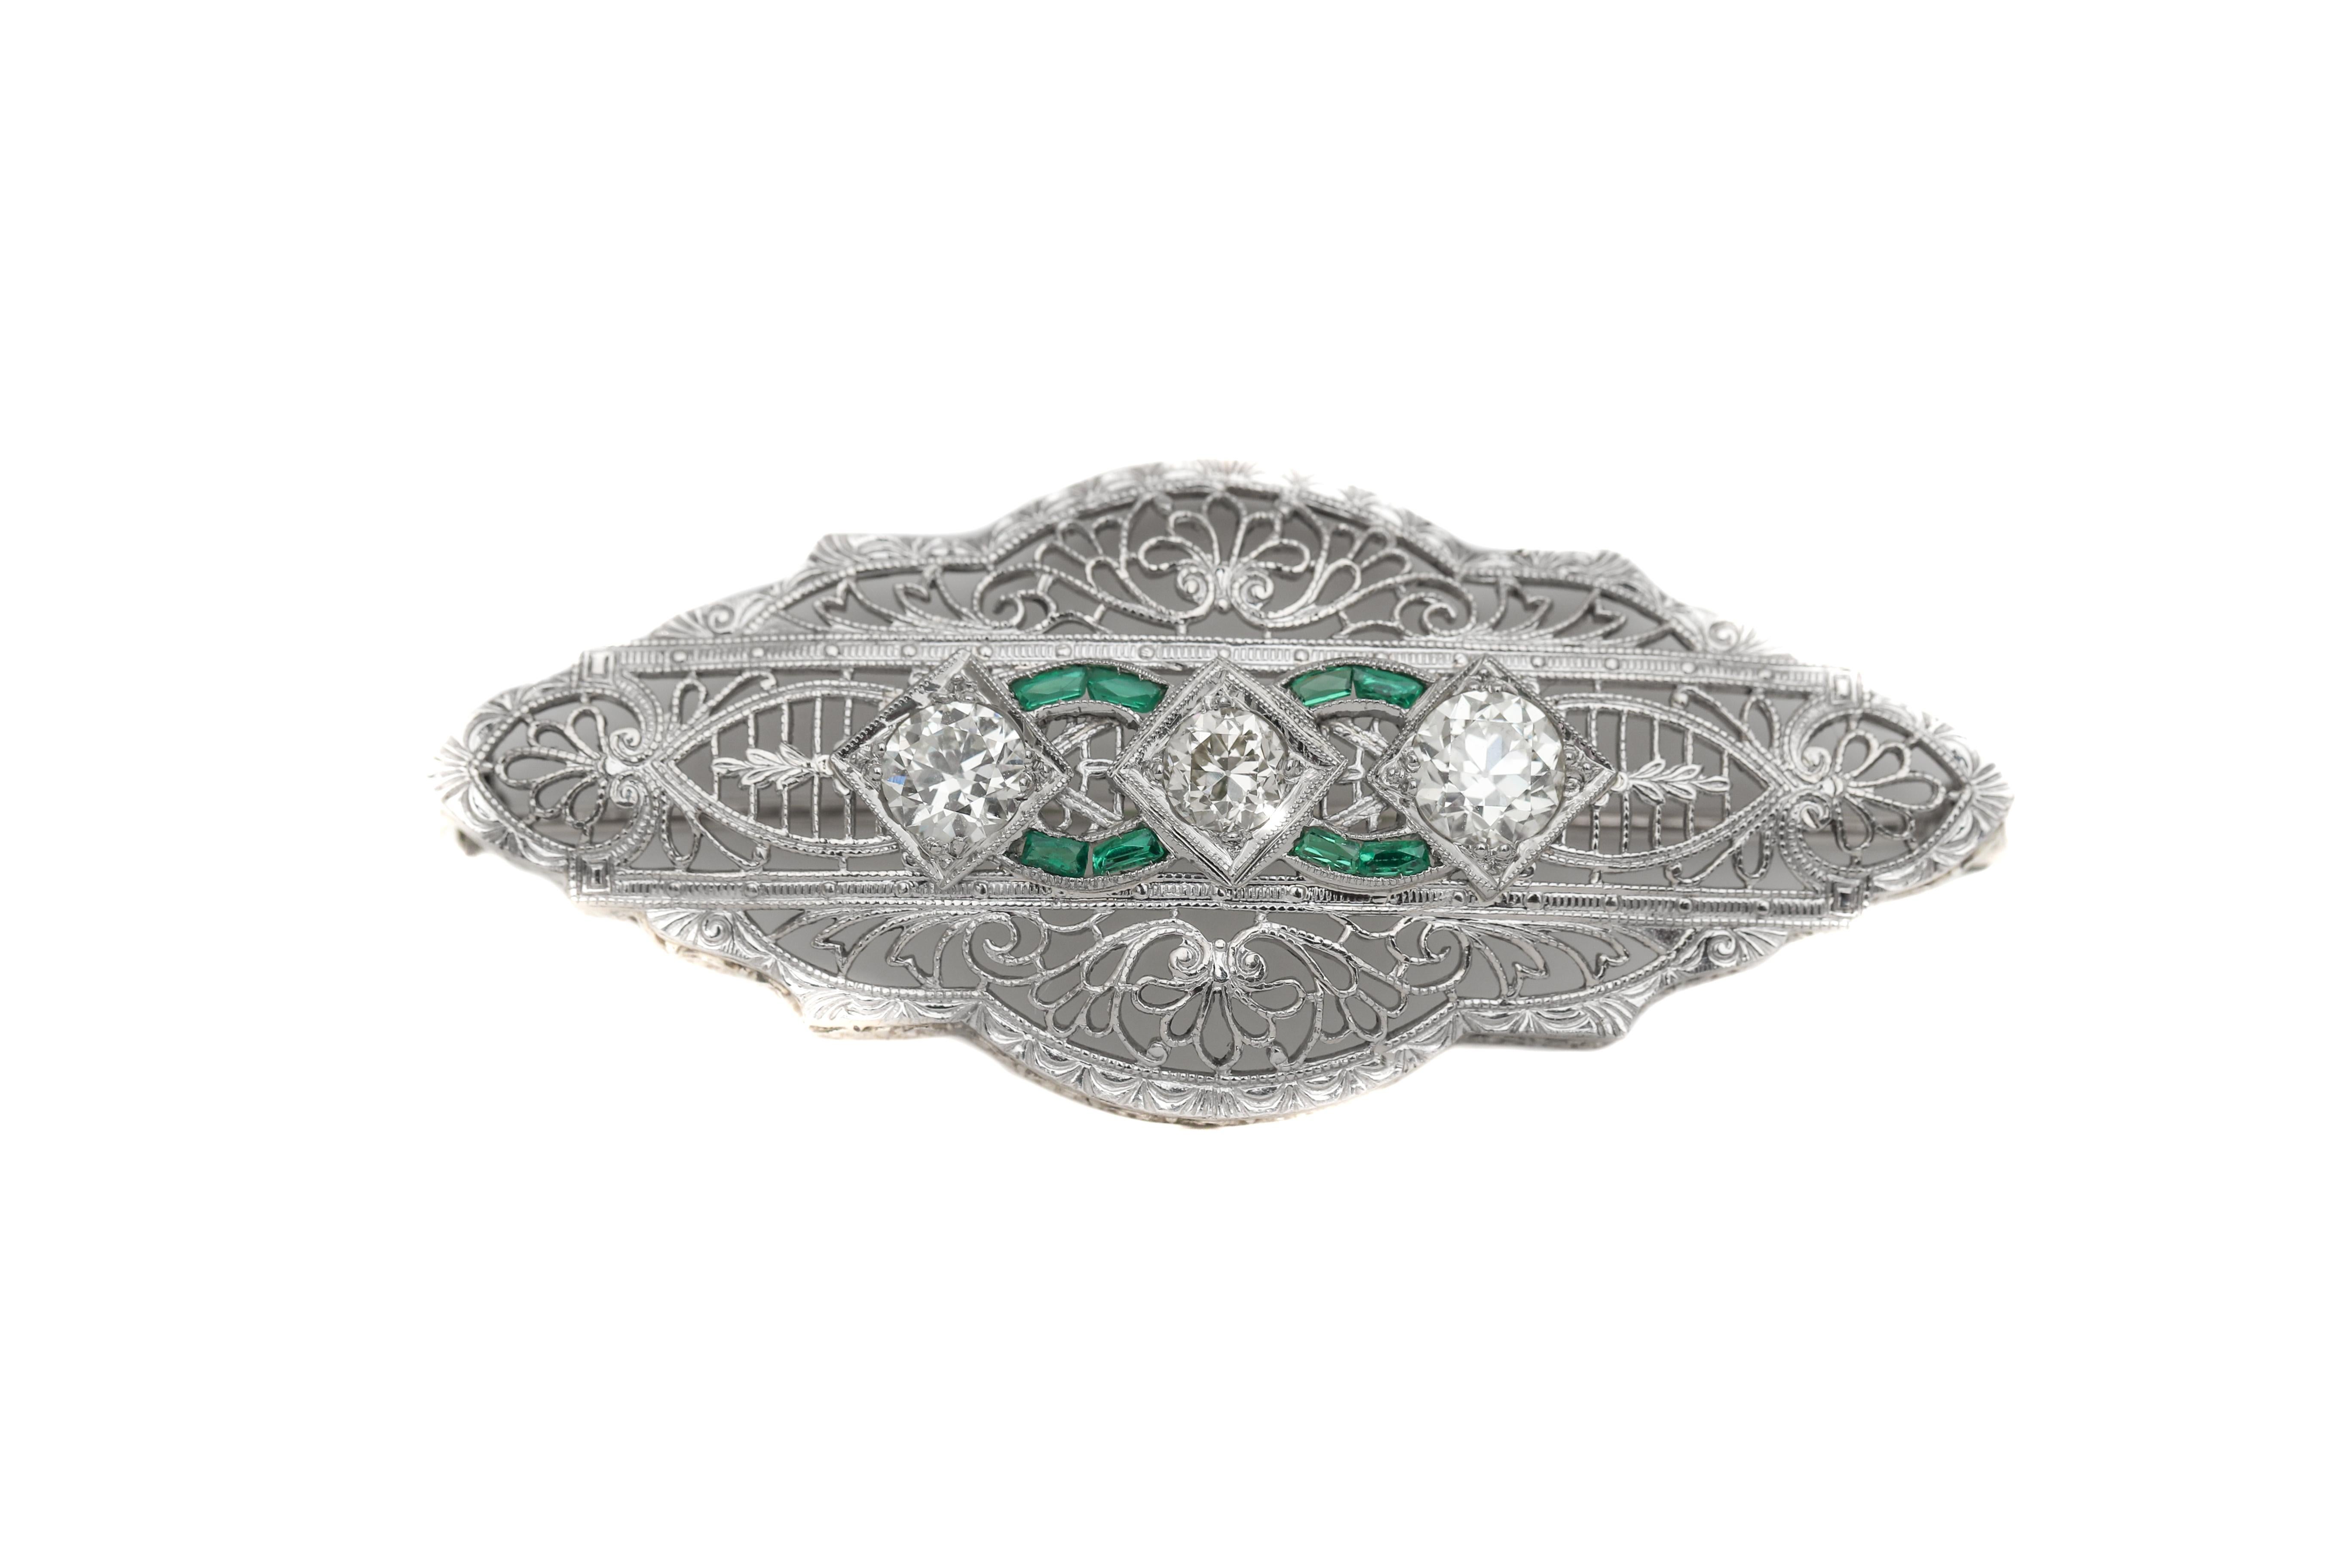 Description: 
This excellent victorian filigree brooch with a symmetrical design pattern featuring an emerald swirl on both sides of the diamond centers. Total carat weight tis 1.20 carats and H color and VS clarity is the average grade. 

This is a